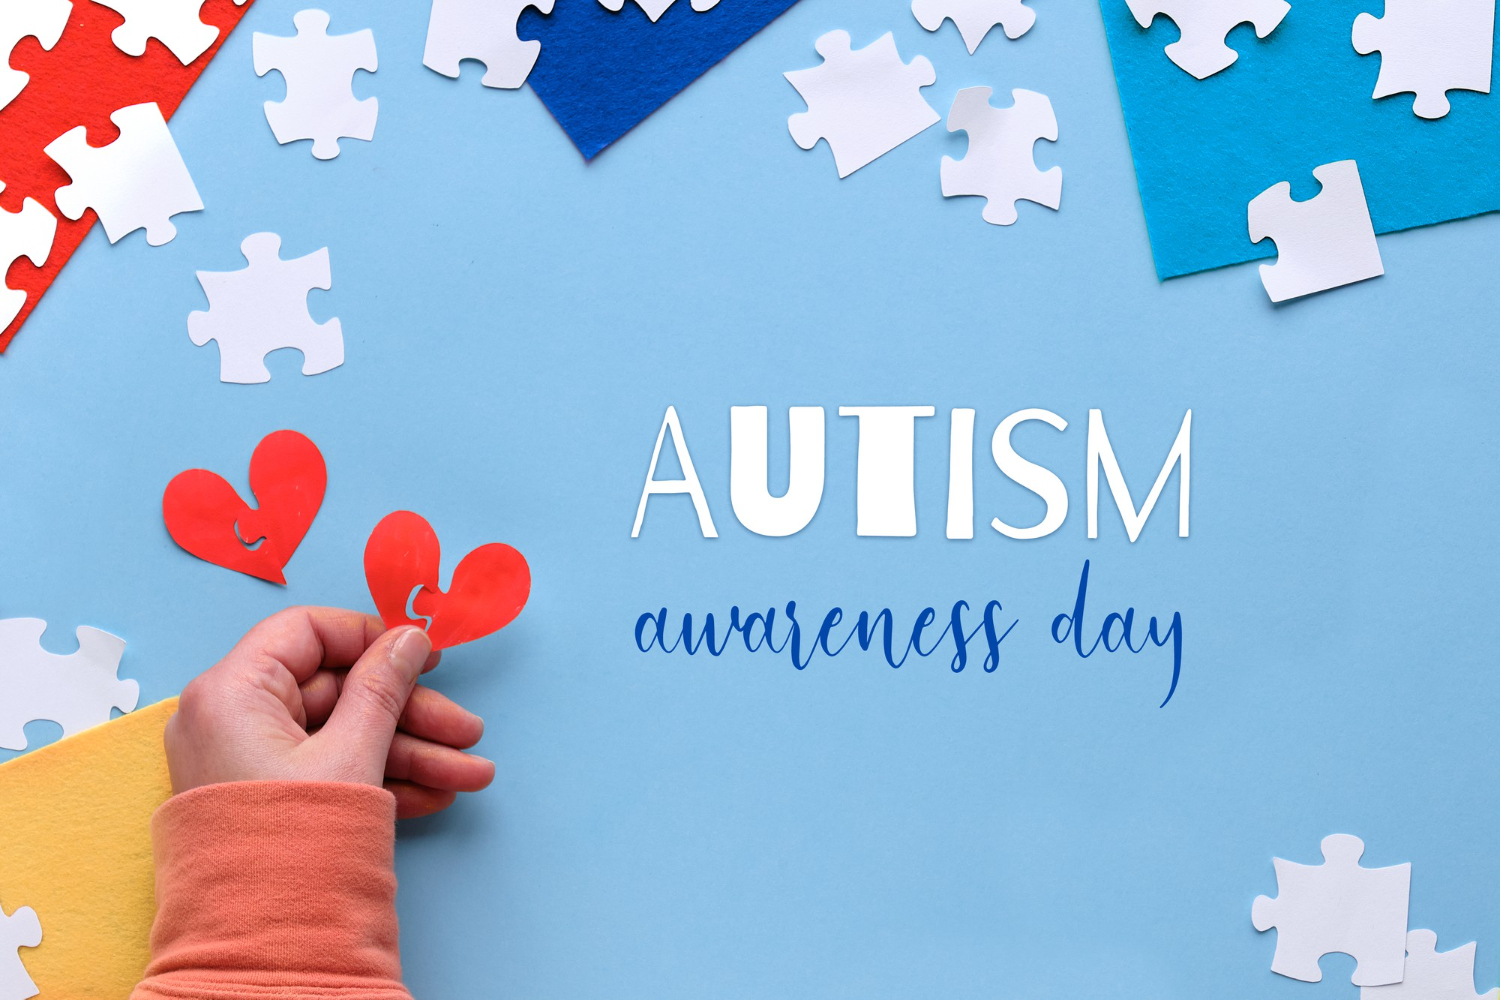 revolutionizing-autism-care-5-tech-trends-to-know-on-world-autism-awareness-day